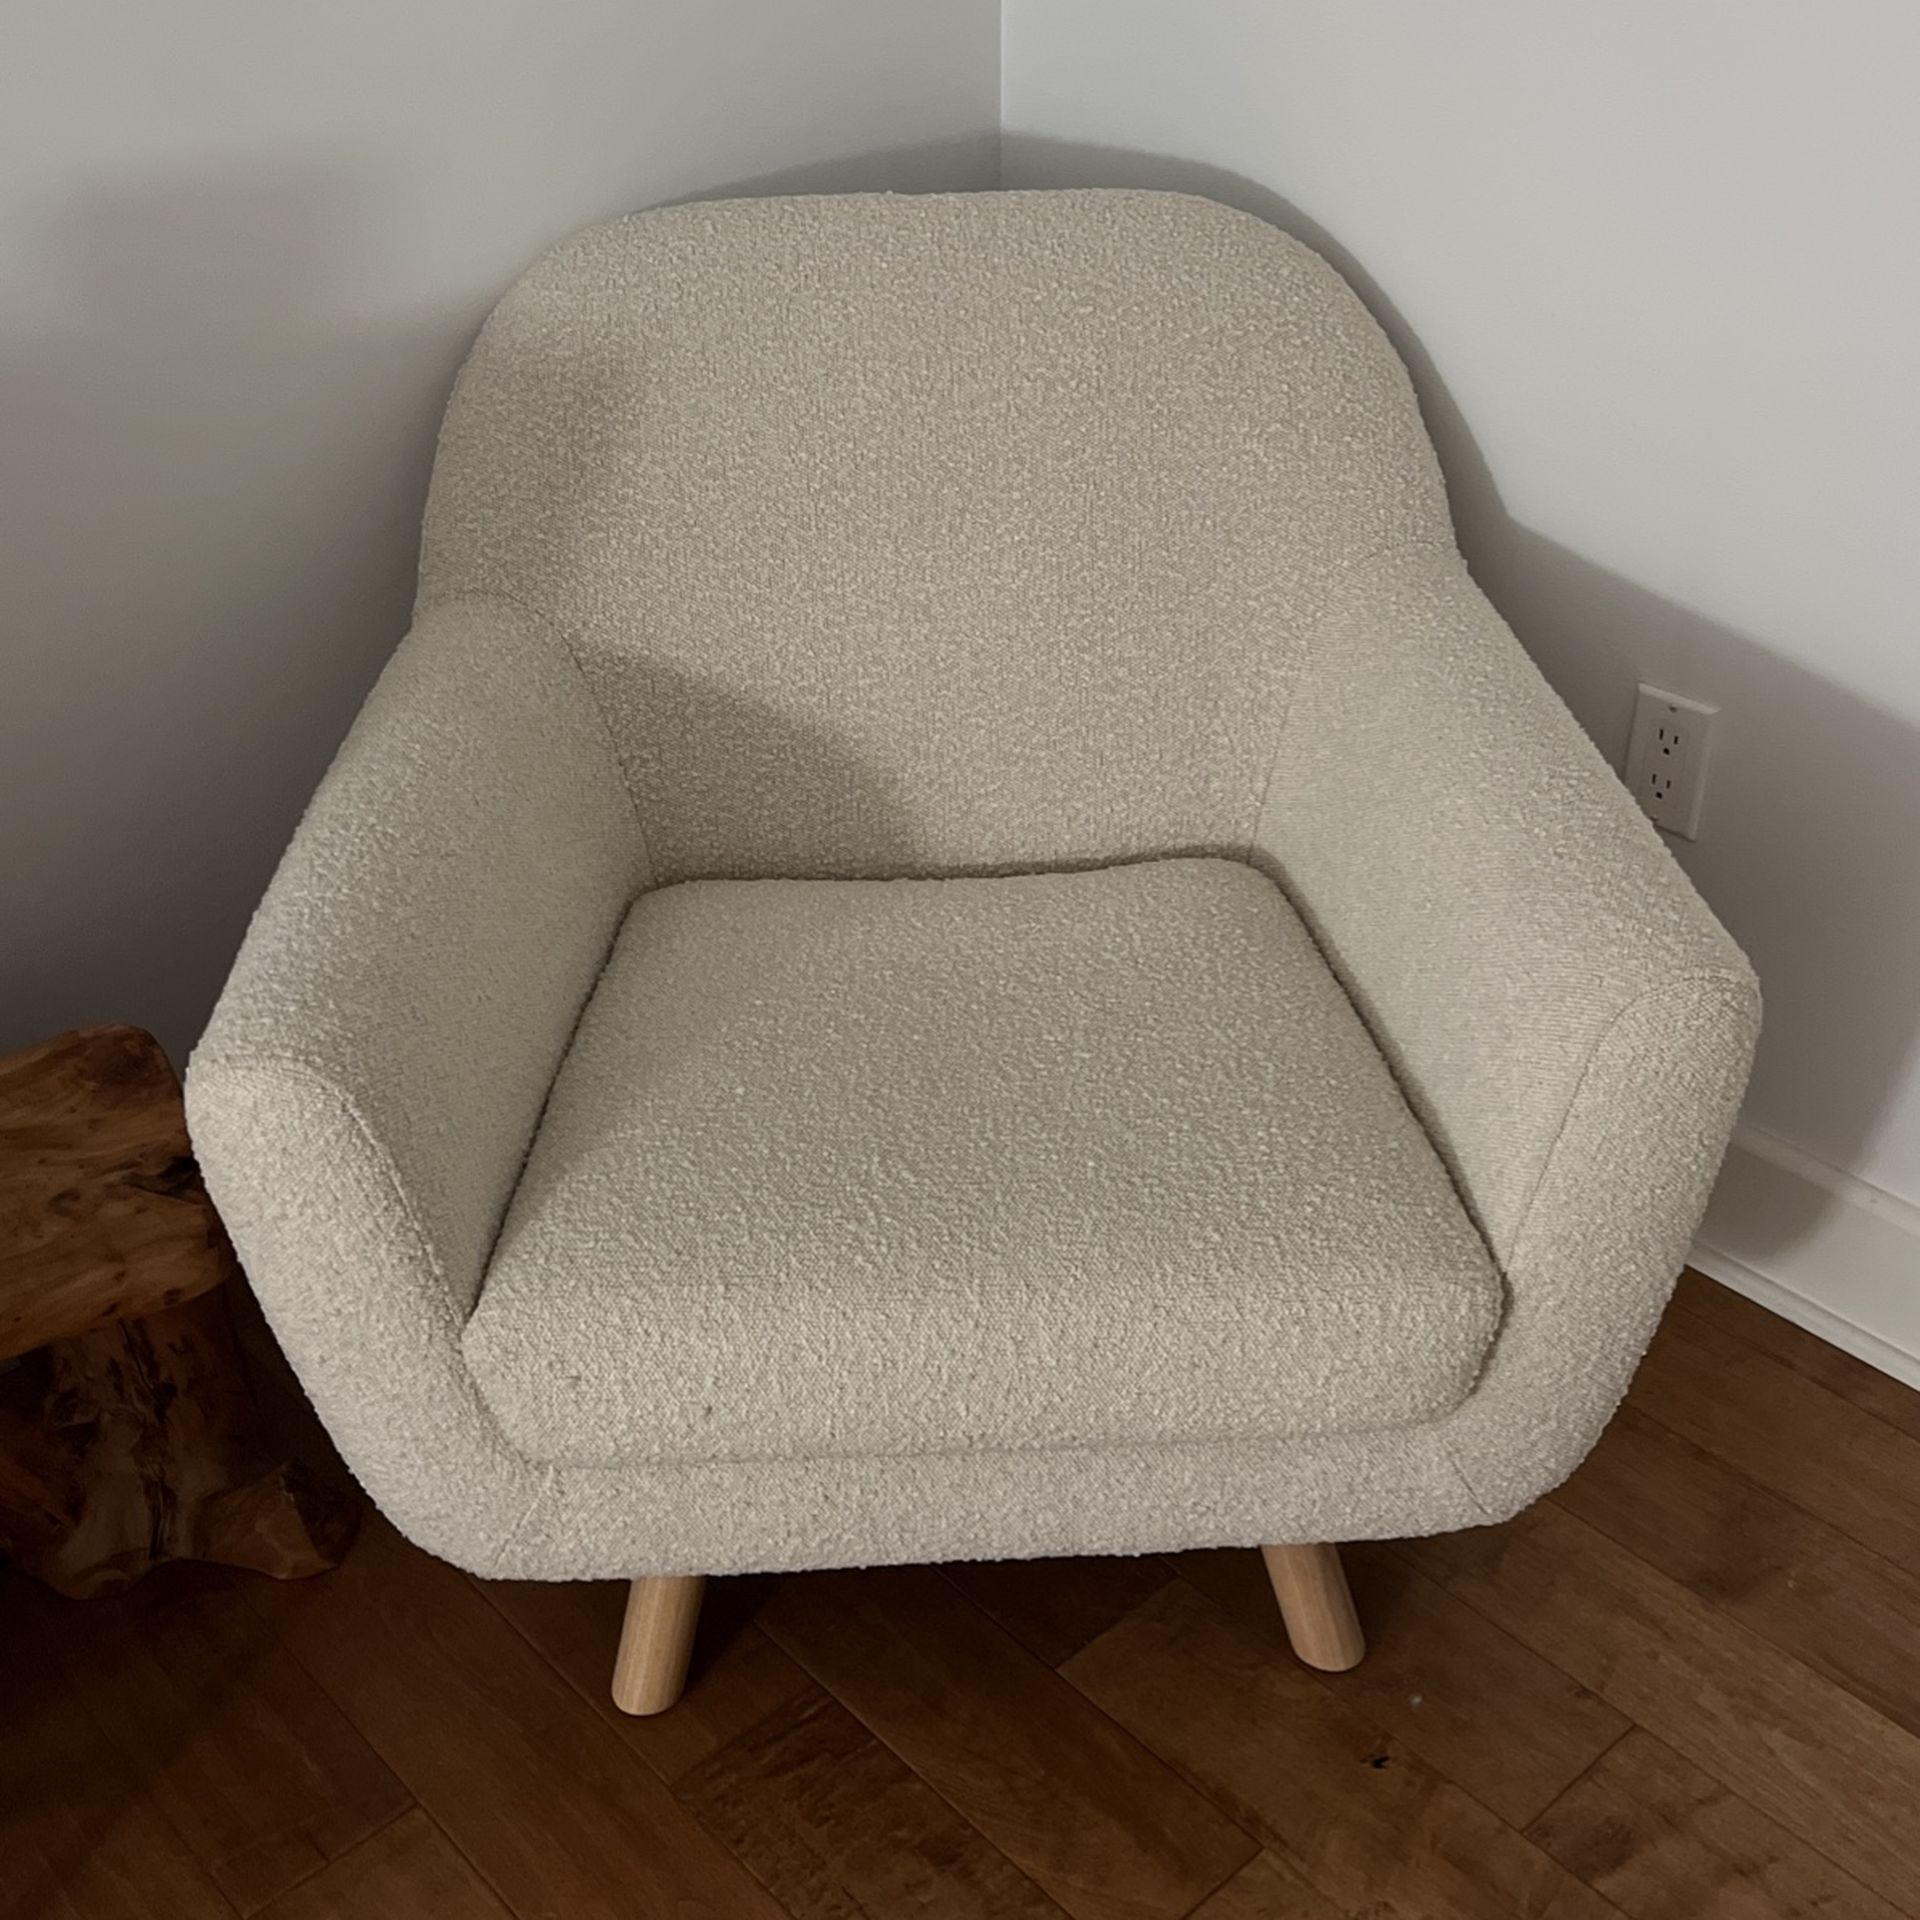 Article Chair Ivory $100